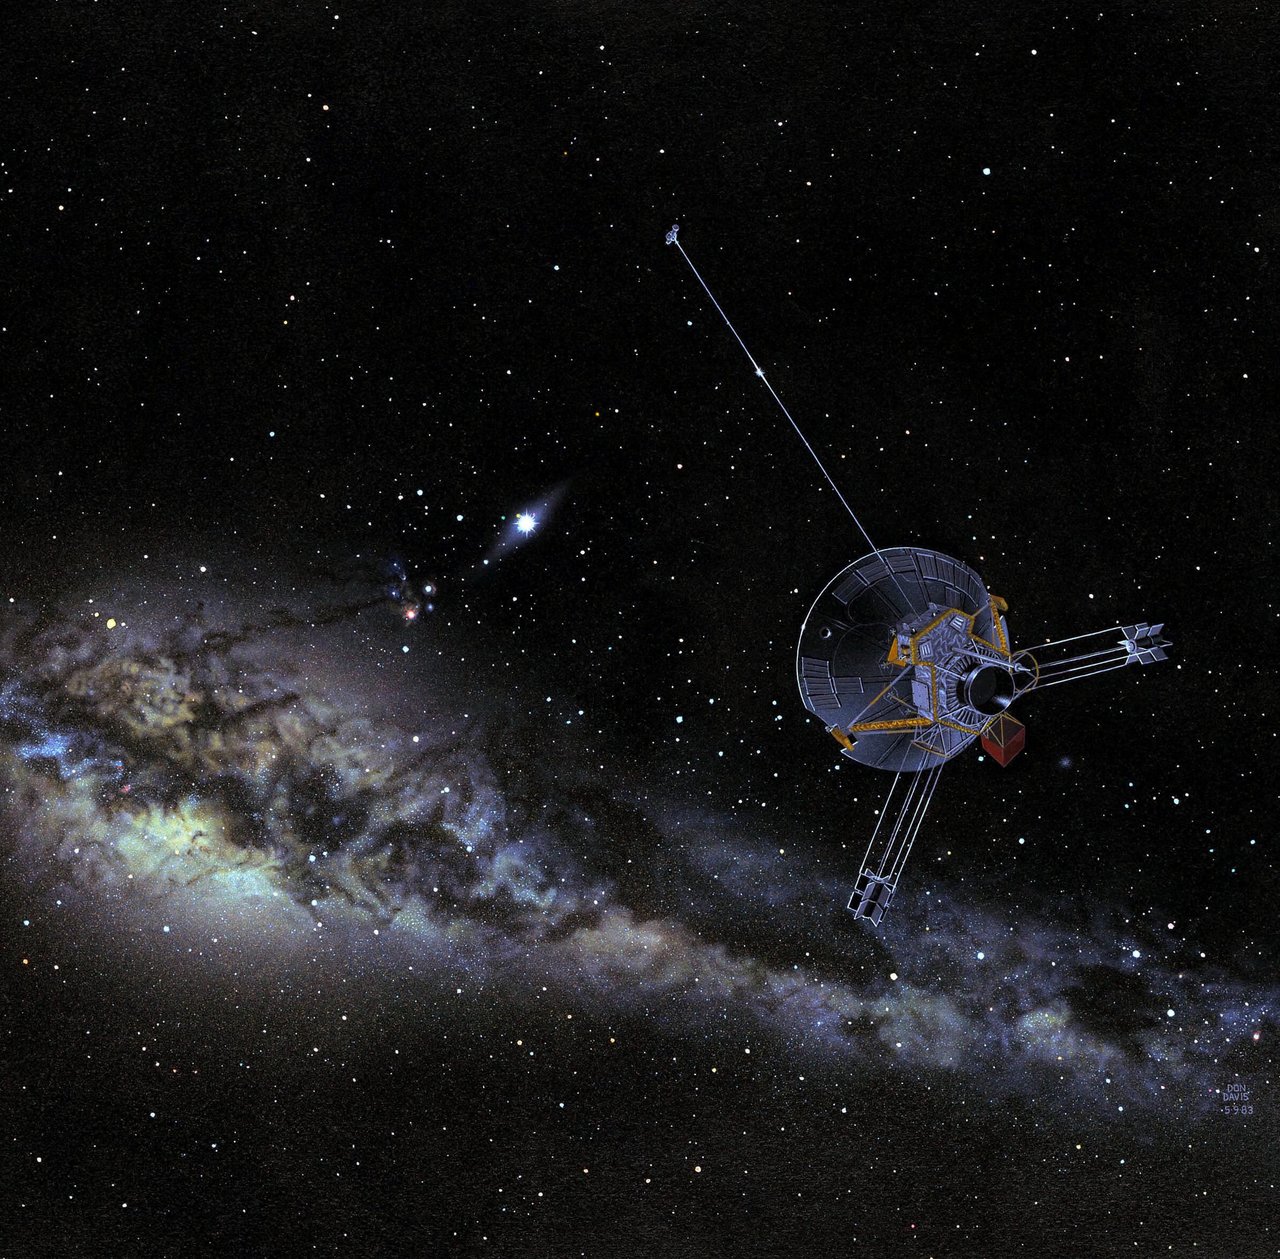 An example of a Pioneer 10 probe.